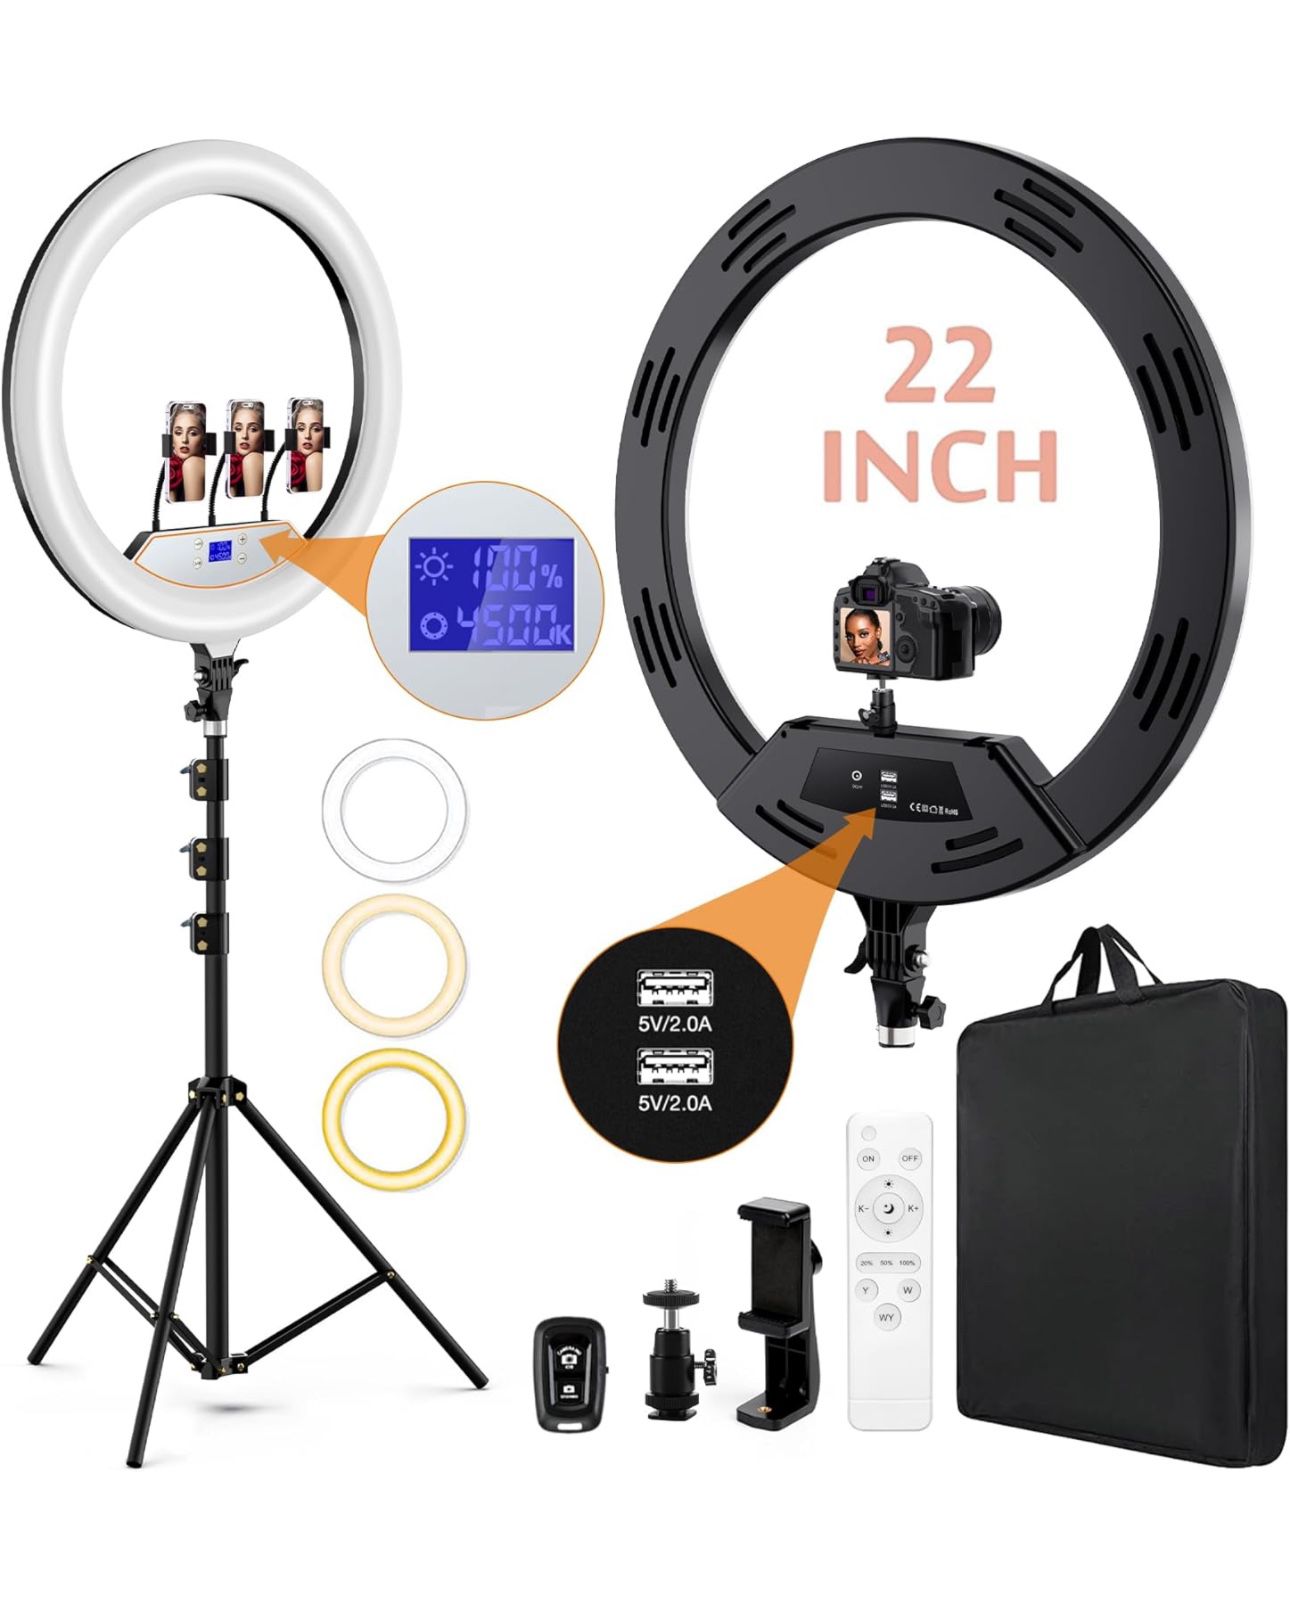 22" LED Ring Light, with 75" Tripod/LCD Display/3+1 Phone Clips/ 2 USB Ports/Wireless Remote, Adjustable 2600K-6500K Color Temperature, for YouTube Fa